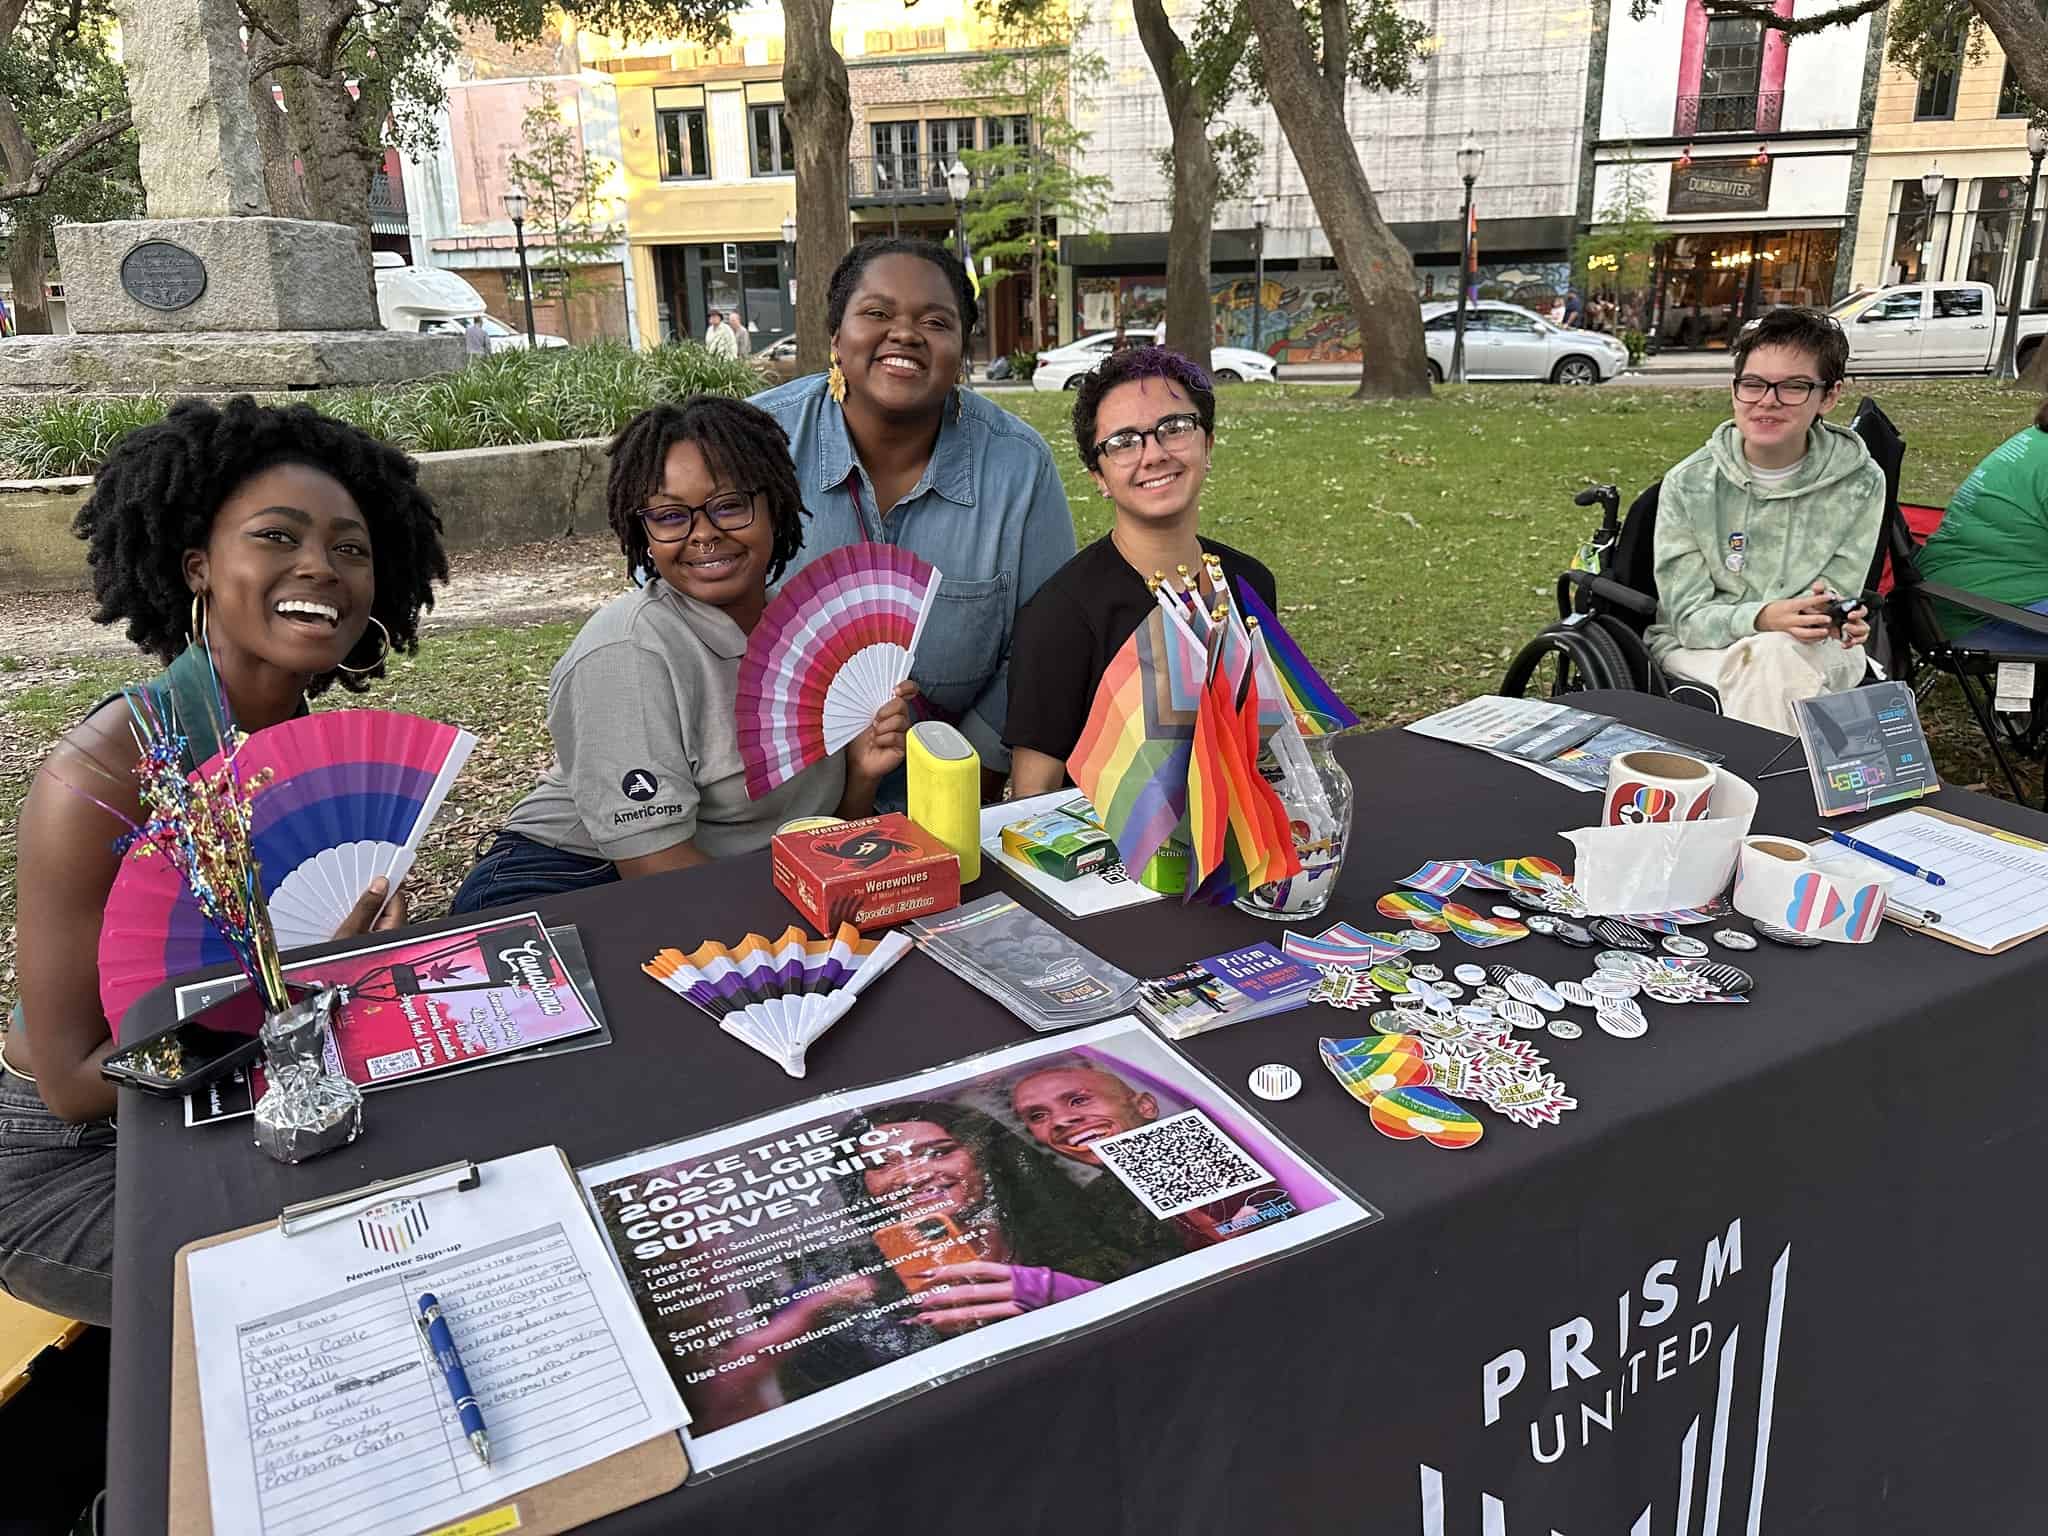 Group of smiling individuals at an outdoor event booth with promotional materials and rainbow flags.